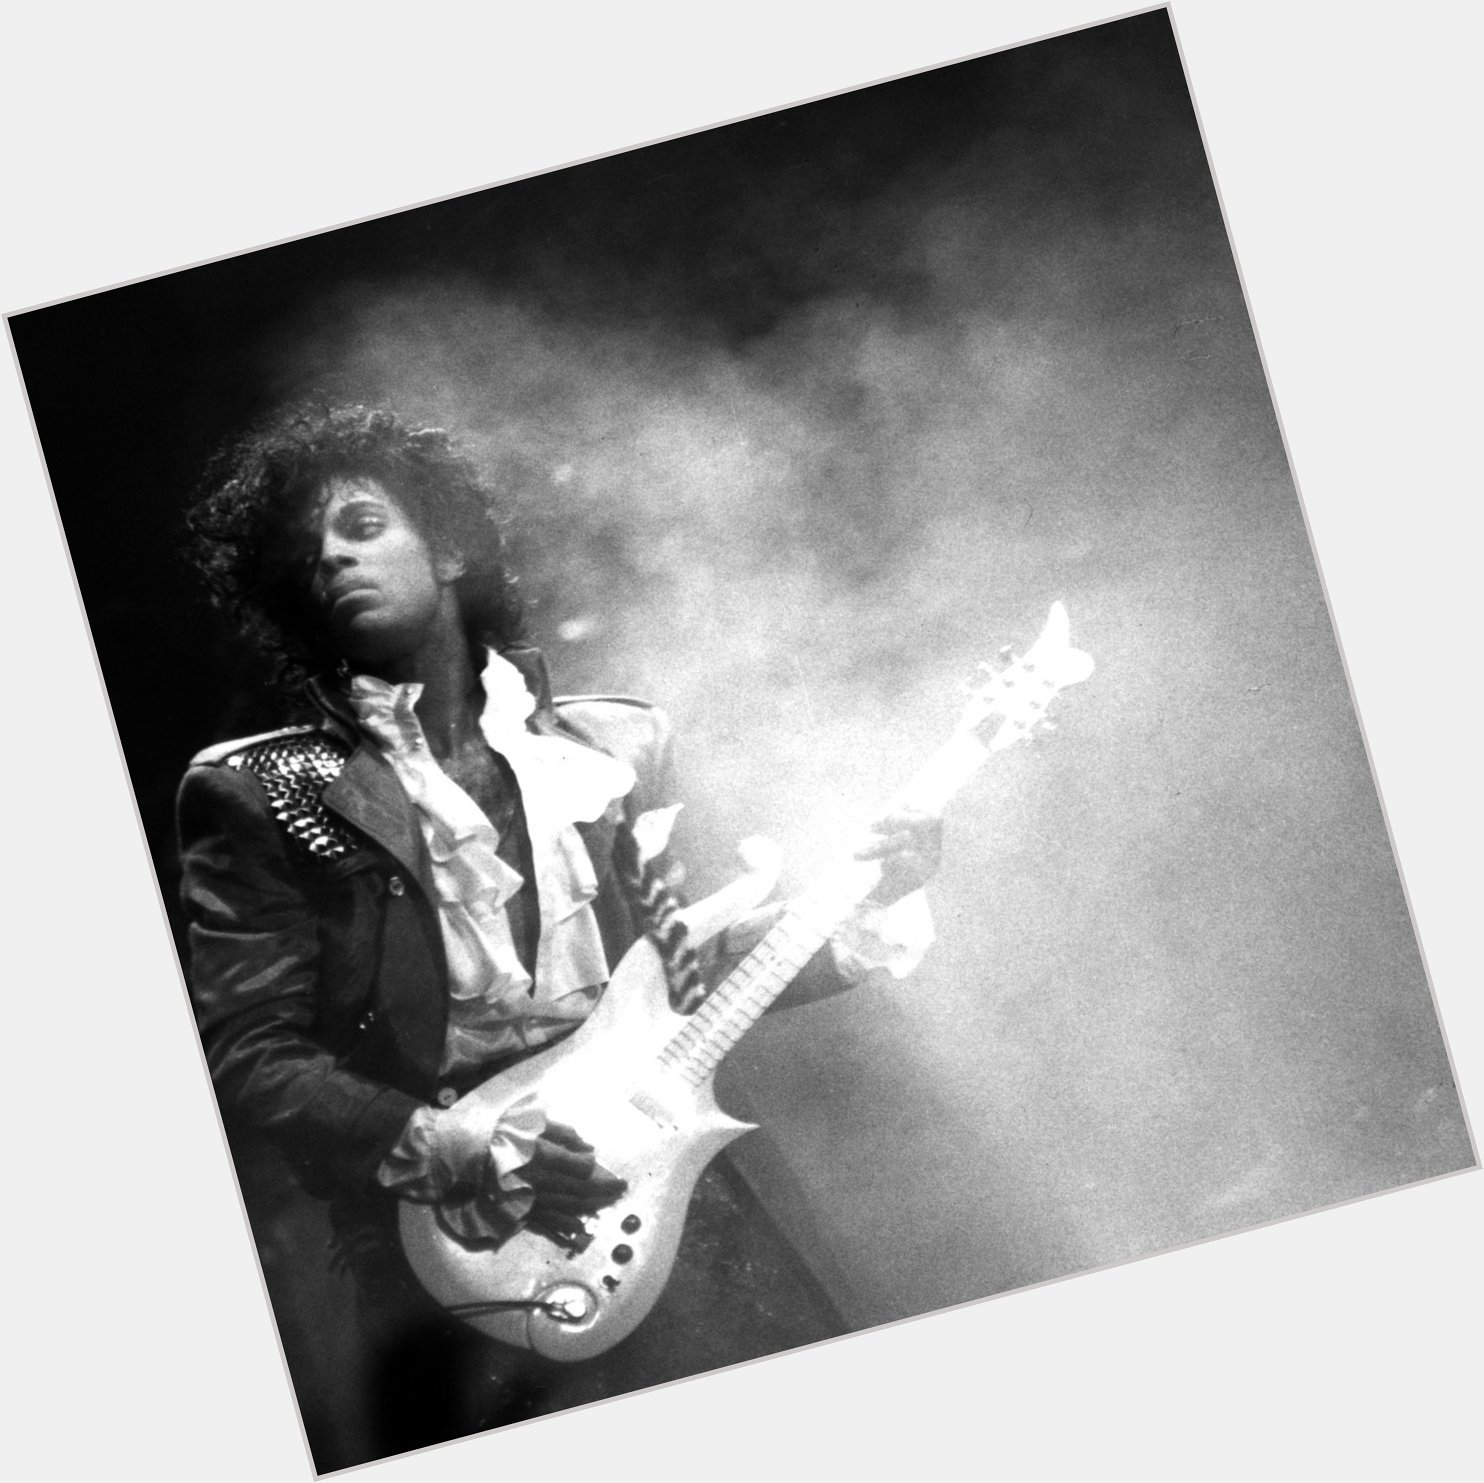 \"A strong spirit transcends rules.\" And the strongest can transcend life and death. Happy birthday, Prince. 